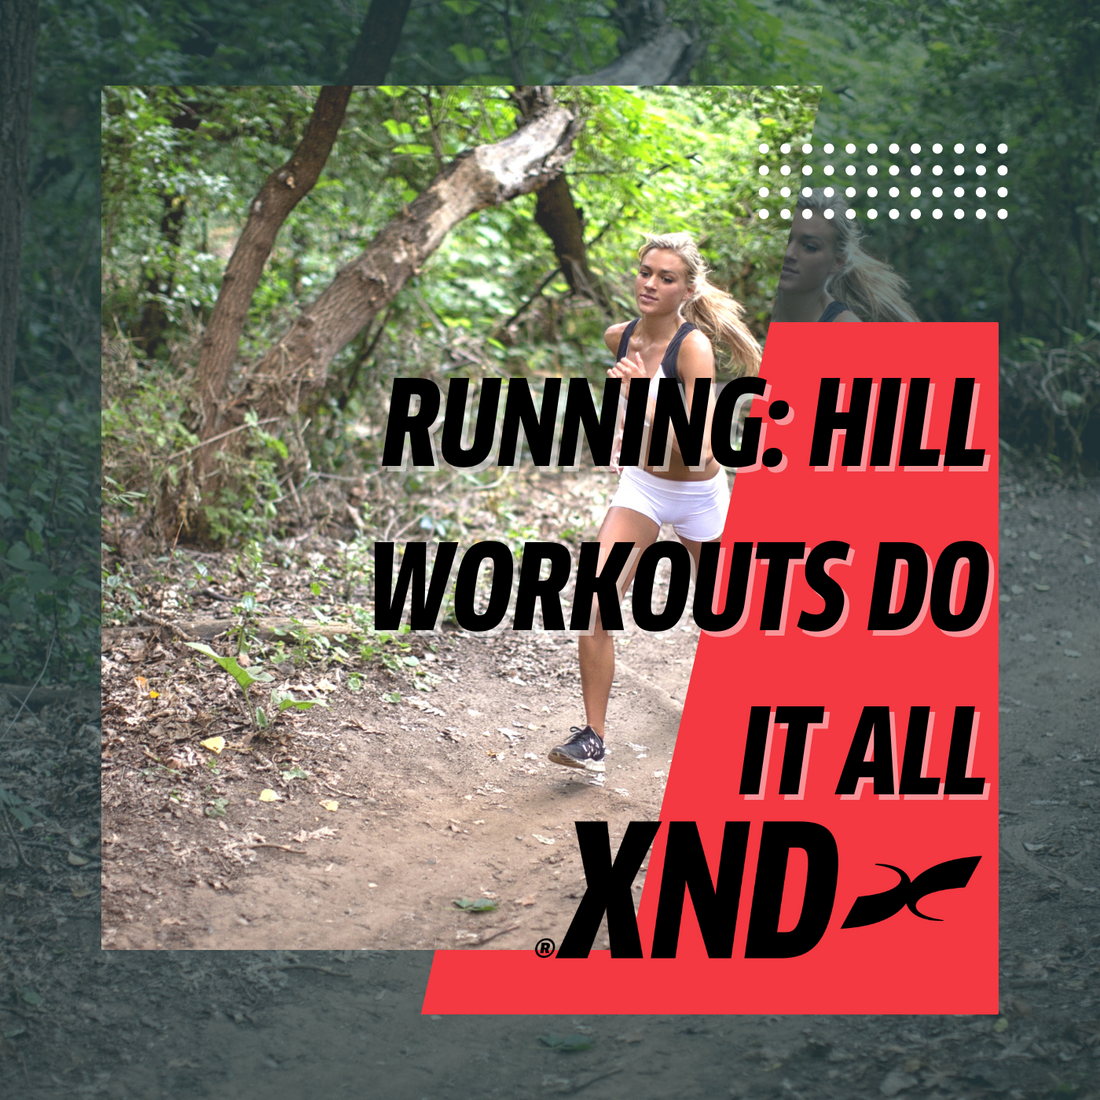 Running: Hill workouts do it all!